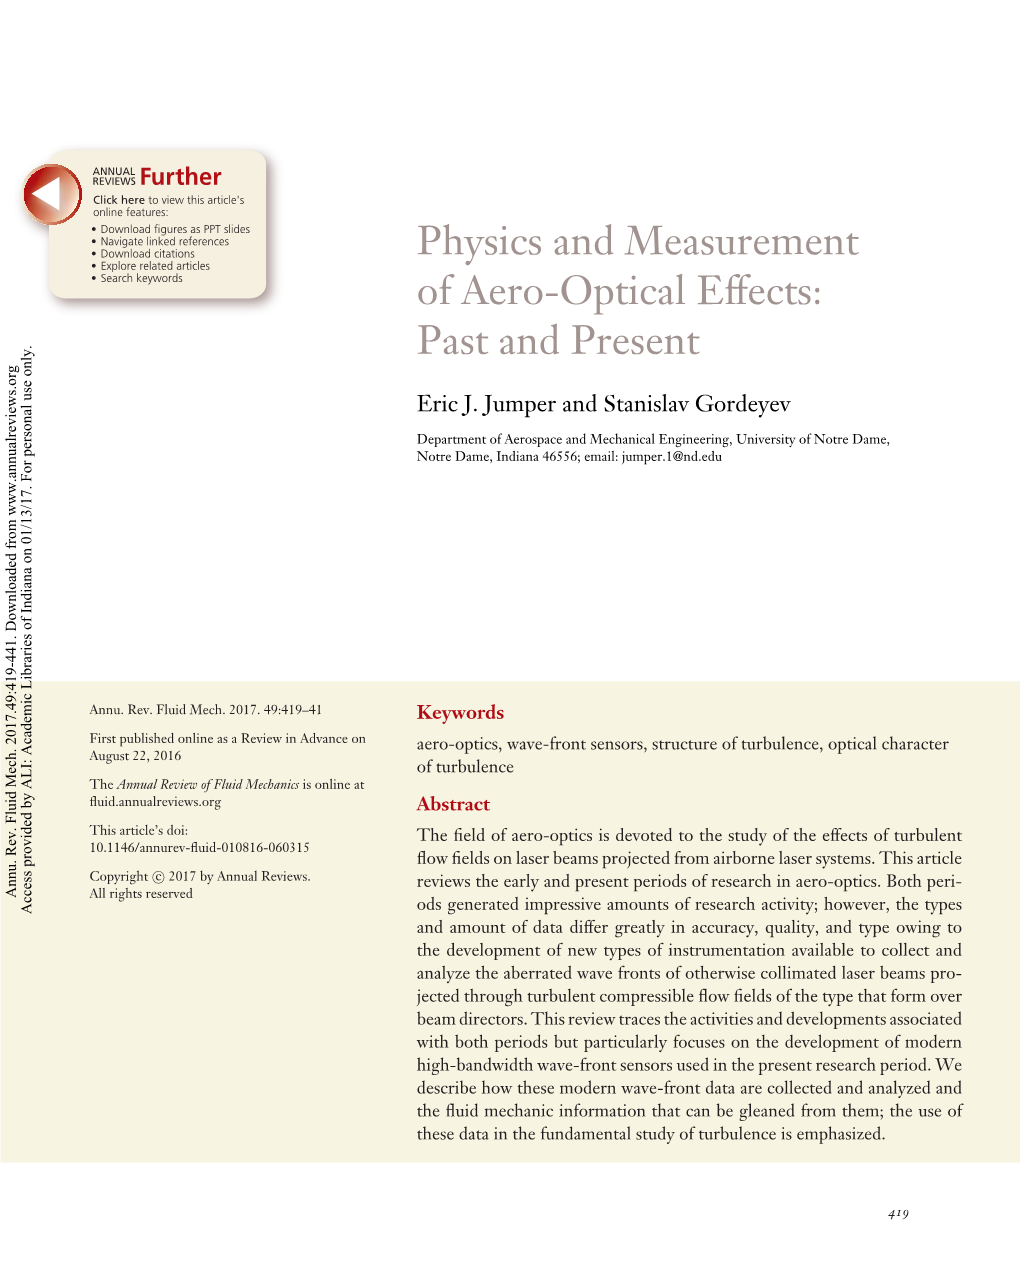 Physics and Measurement of Aero-Optical Effects: Past and Present Eric J